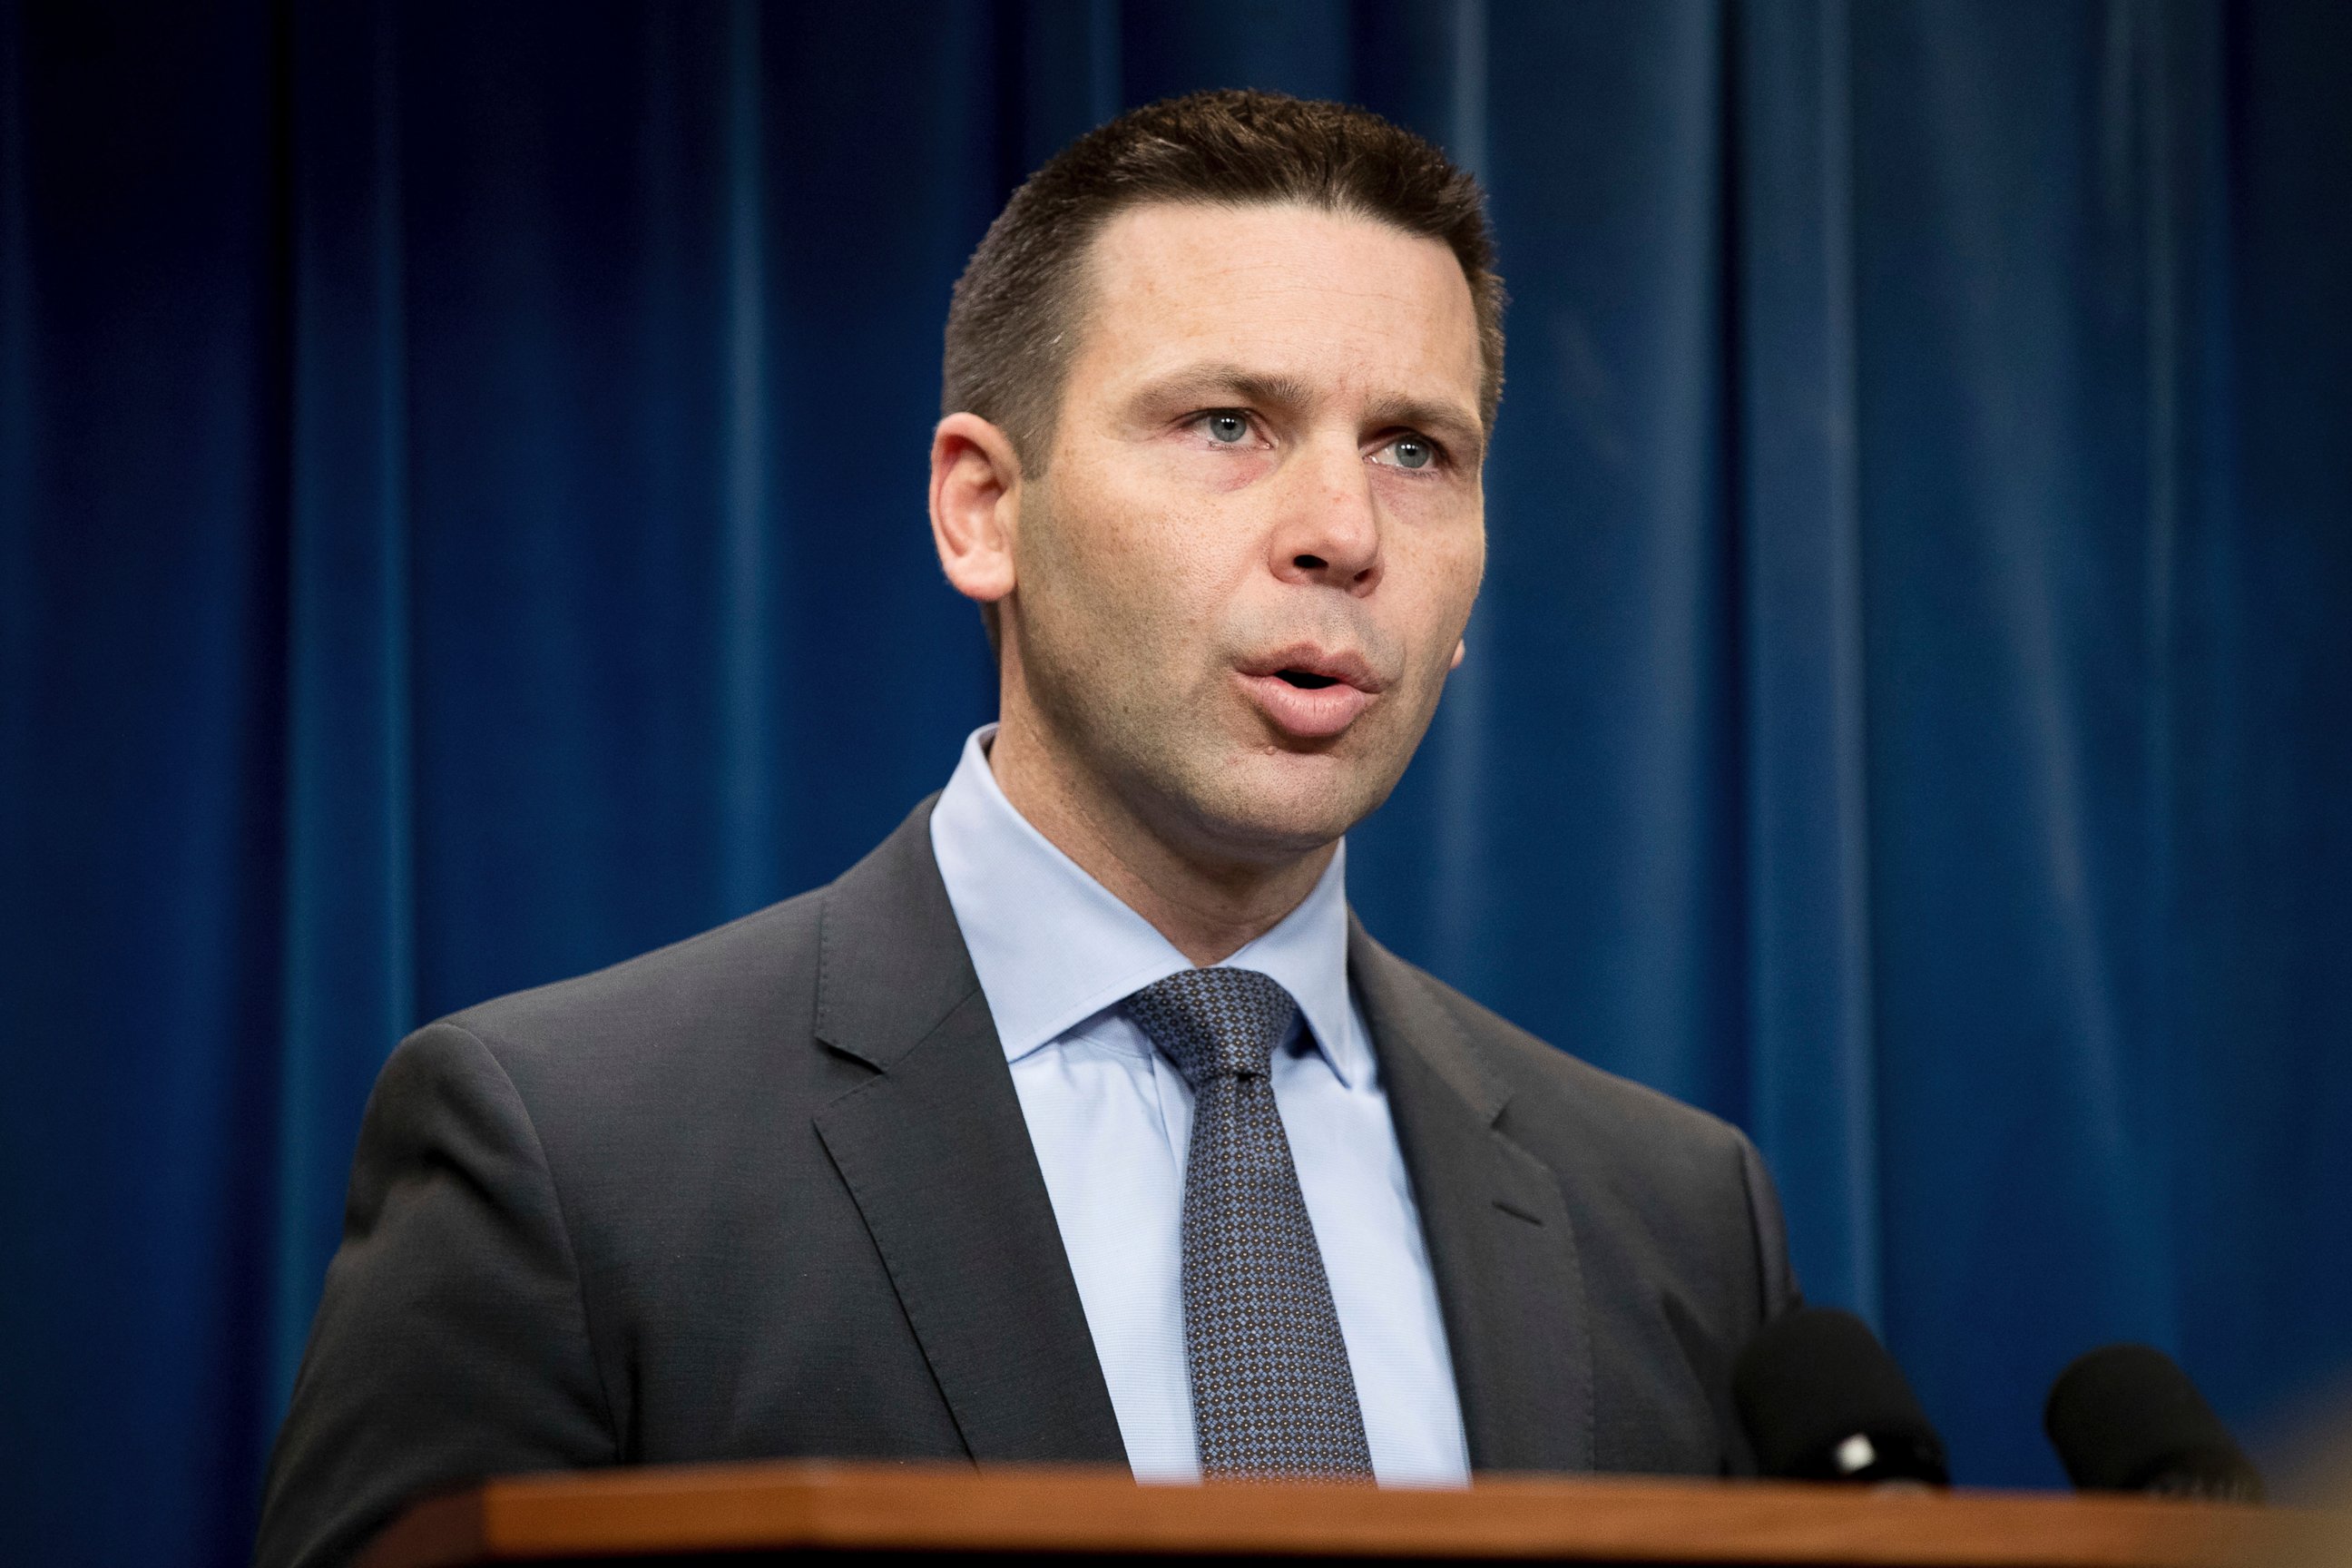 PHOTO: U.S. Customs and Border Protection Acting Commissioner Kevin McAleenan speaks during a press conference in Washington, D.C., Jan. 31, 2017.